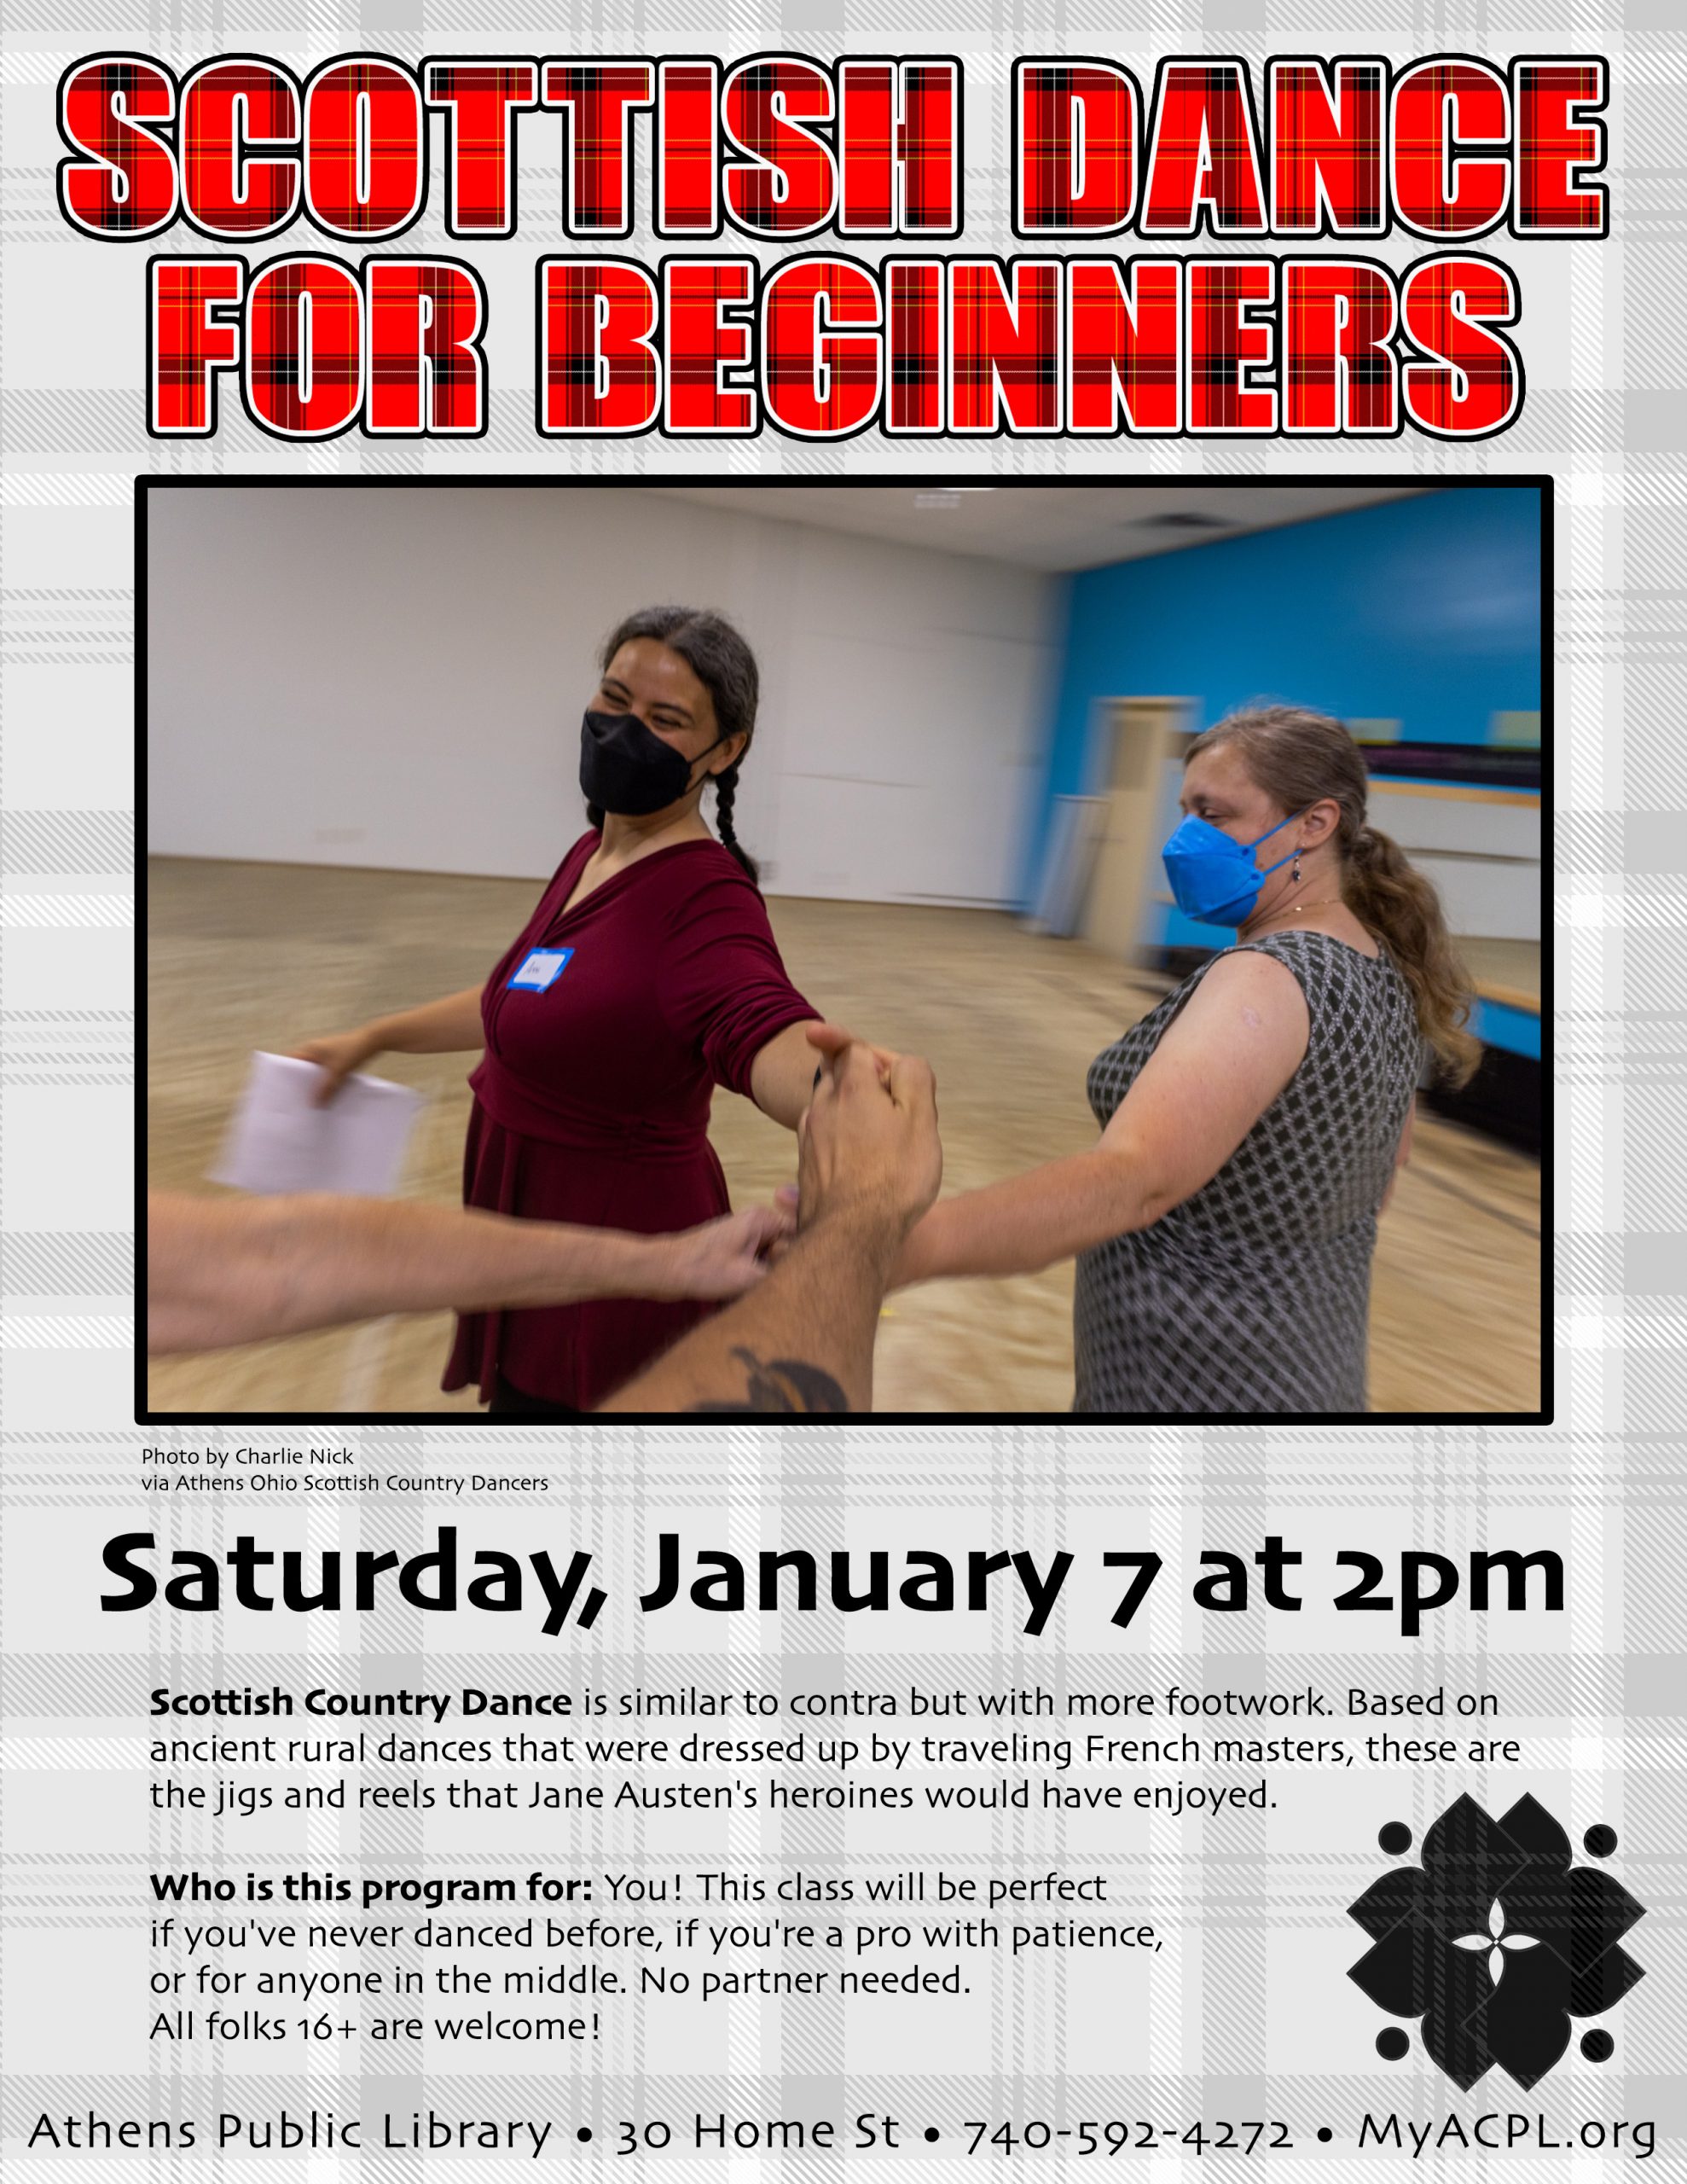 A flyer for Scottish Dance for Beginners. The flyer has a picture of two masked people dancing and has the following information: Saturday, January 7 at 2 p.m. Scottish Country Dance is similar to contra but with more footwork. Based on ancient rural dances that were dressed up by traveling French masters, these are the jigs and reels that Jane Austen’s heroines would have enjoyed. Who is this program for: You! This class will be perfect if you’ve never danced before. If you’re a pro with patience or for anyone in the middle. No partner needed. All folks 16+ are welcome!